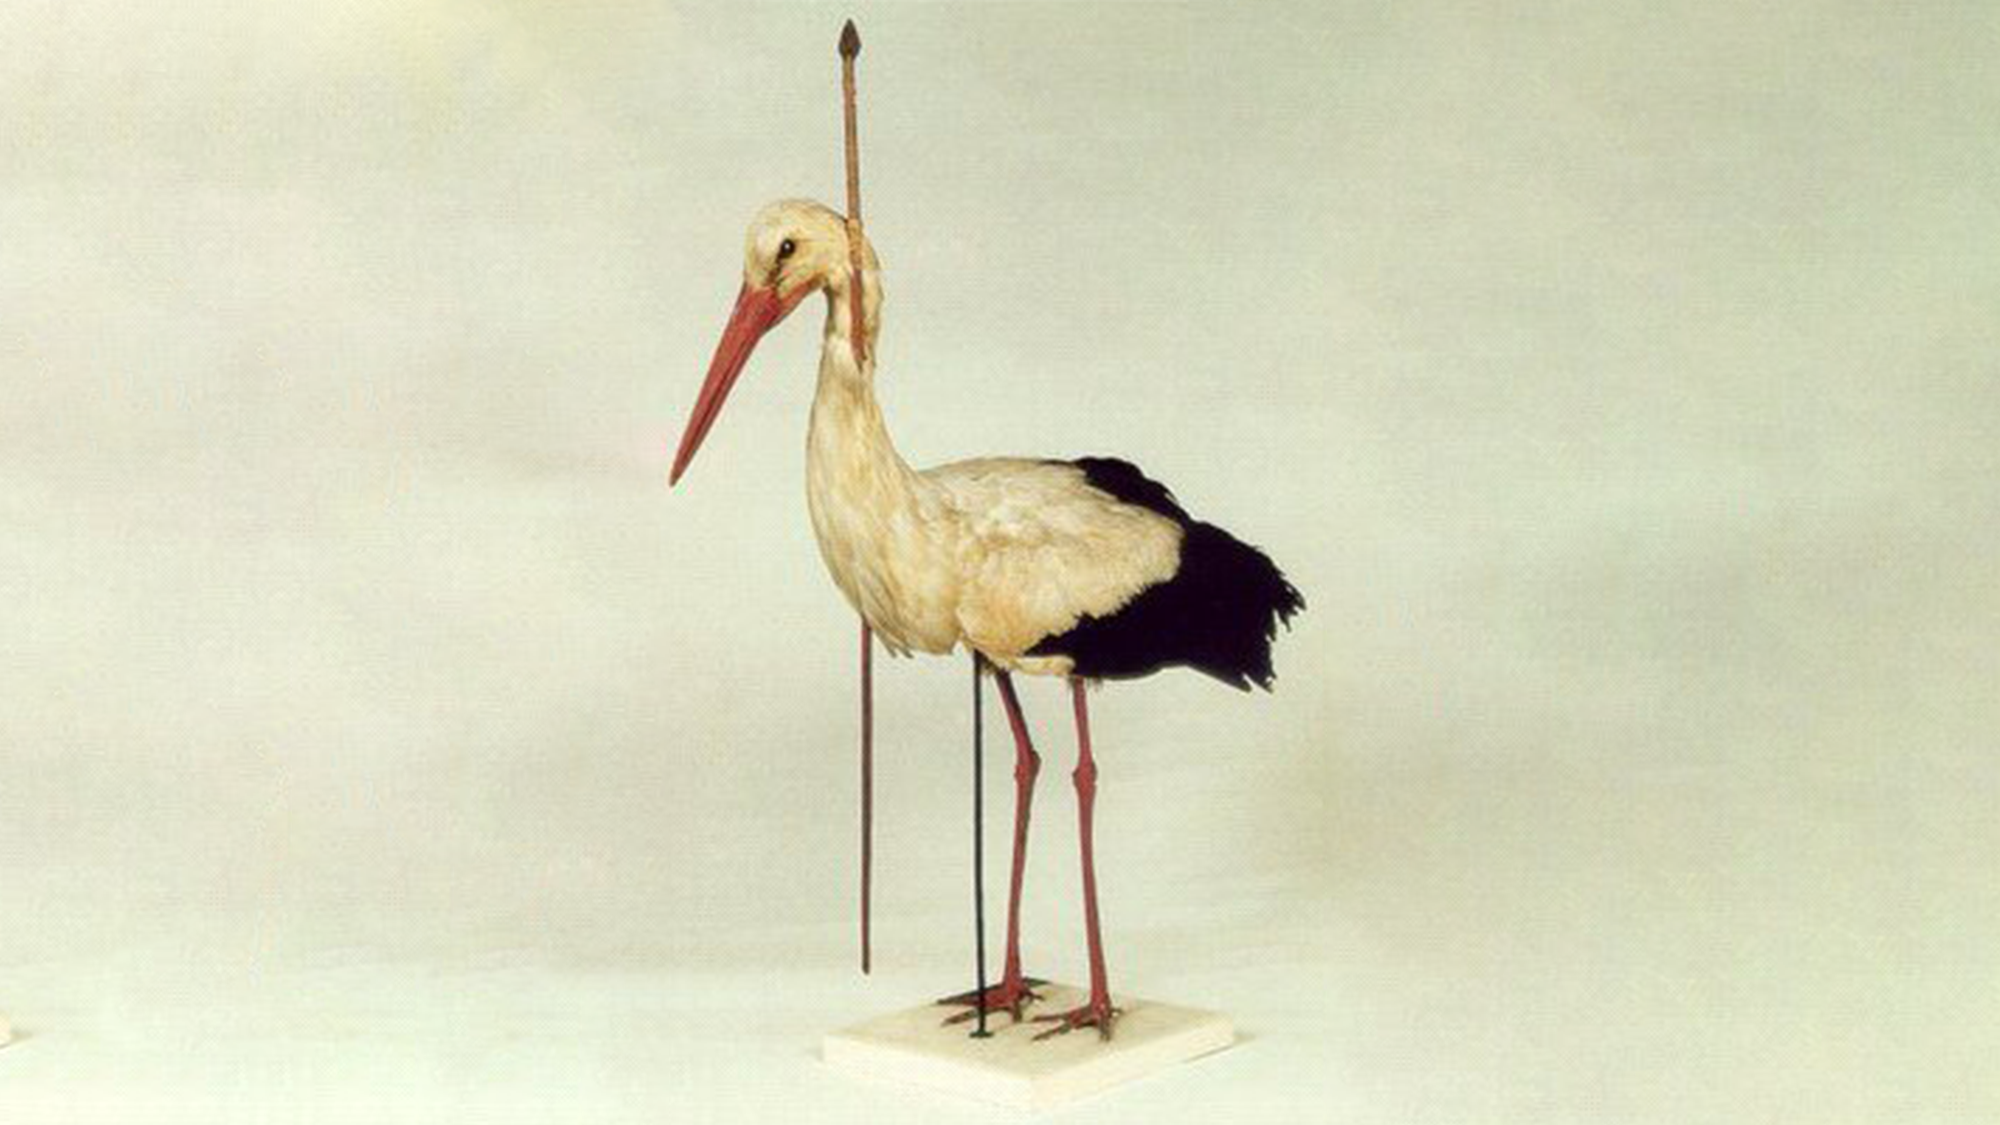 A stork impaled by a 30-inch spear flew thousands of miles to make it home